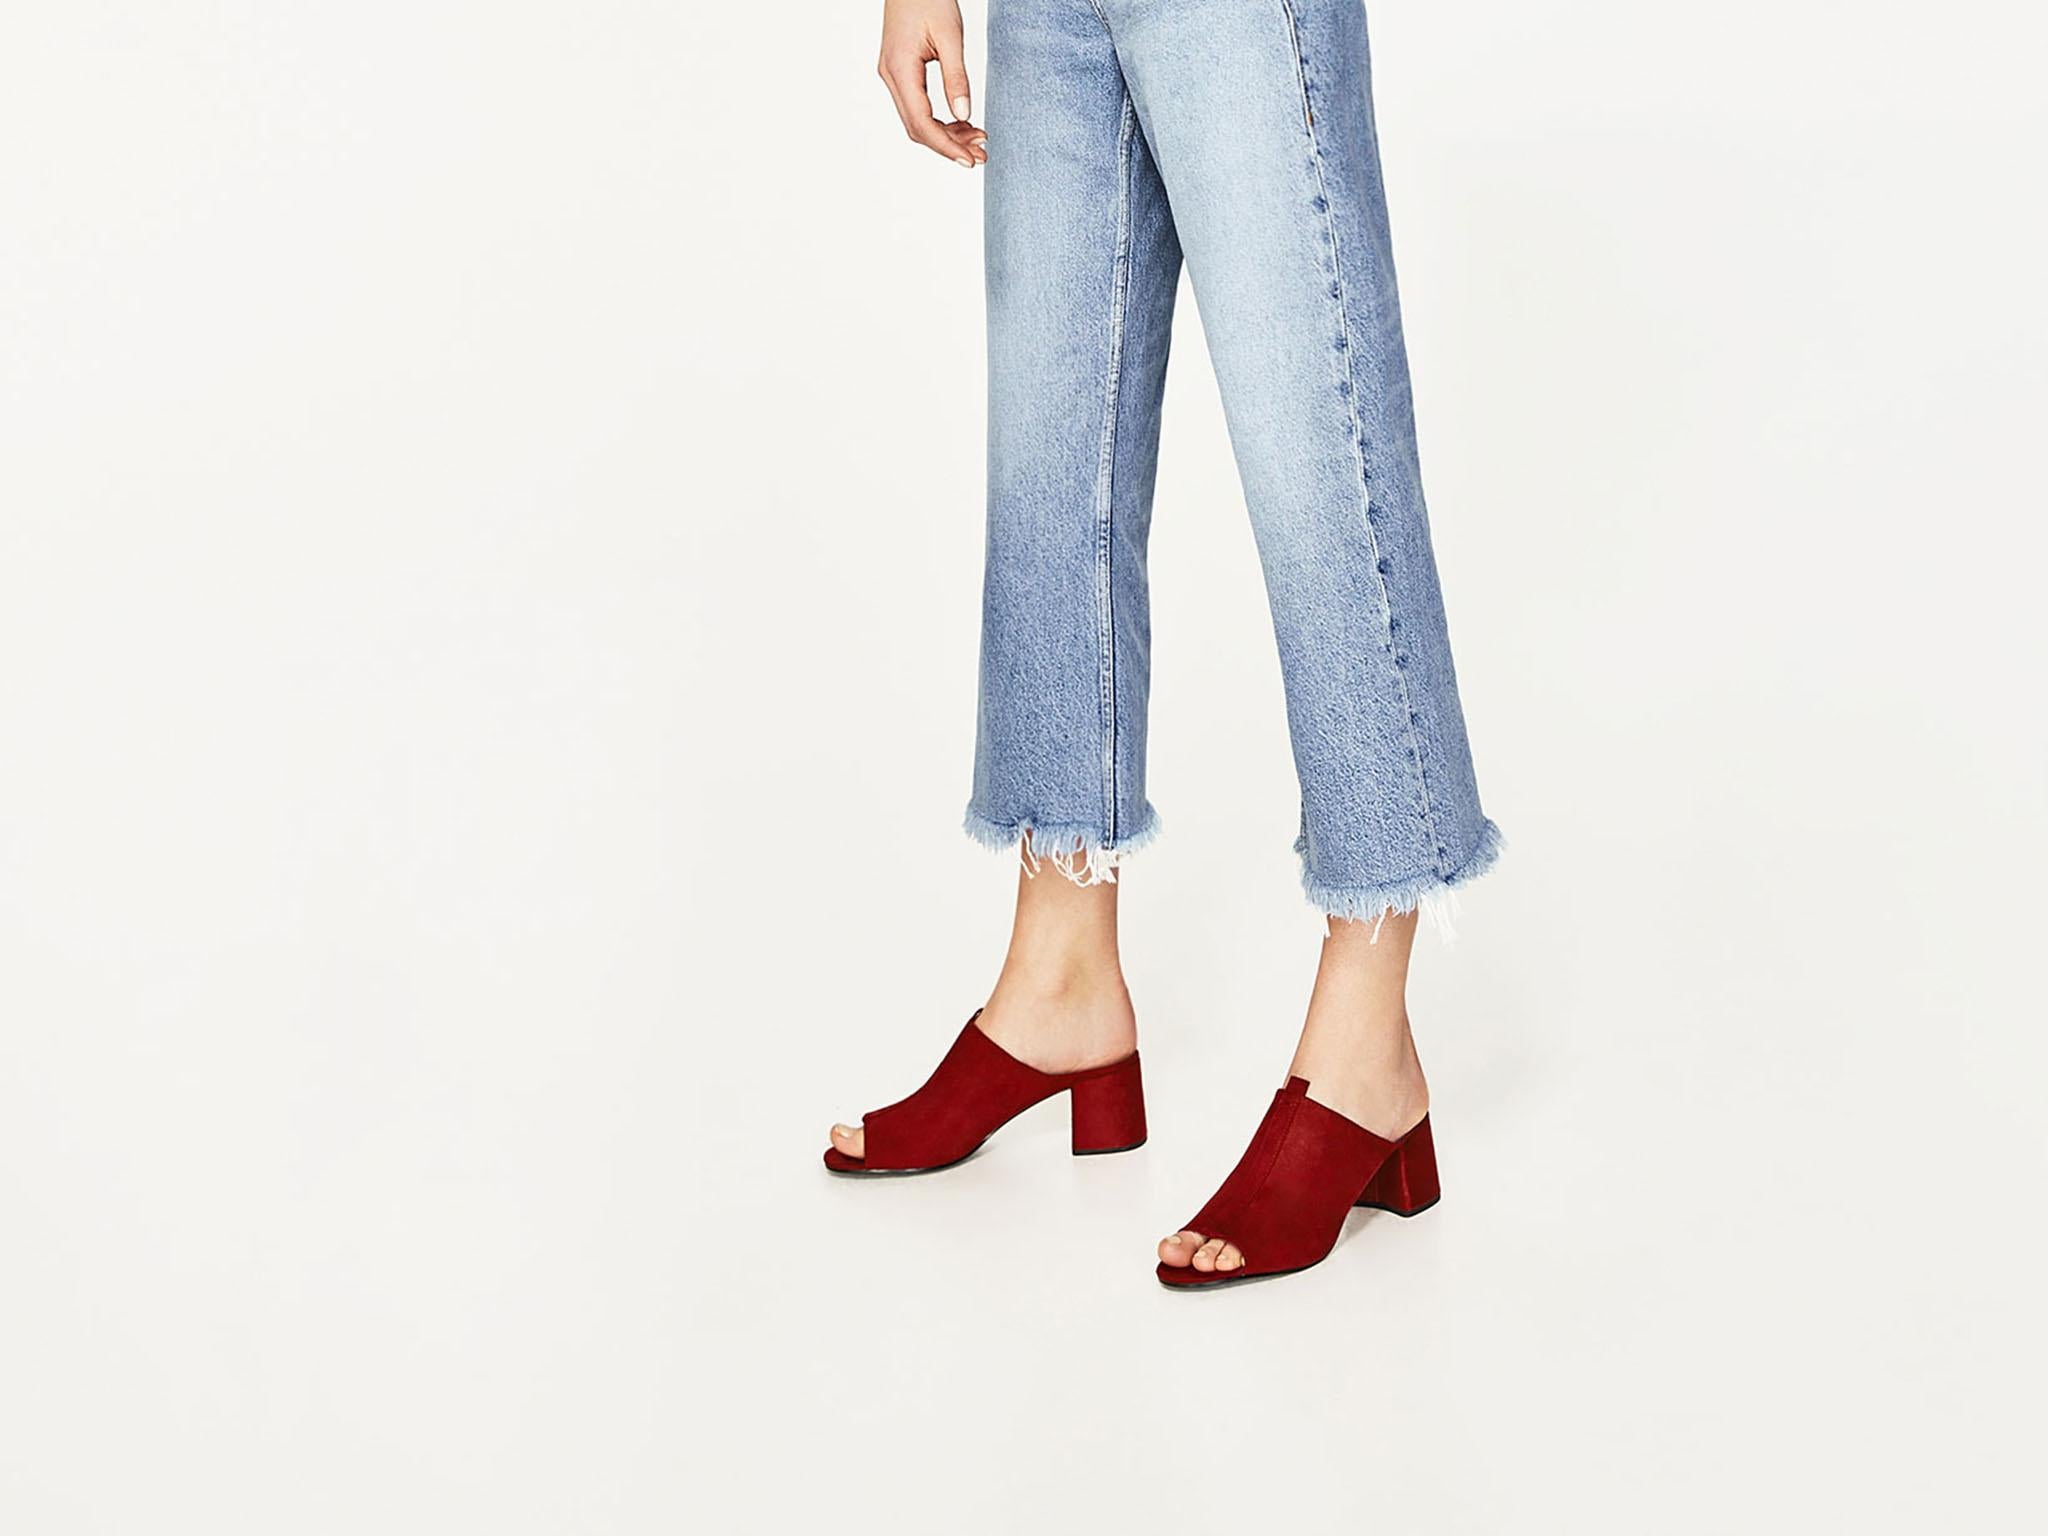 The block heel mules from Zara offer comfort and style for £25.99